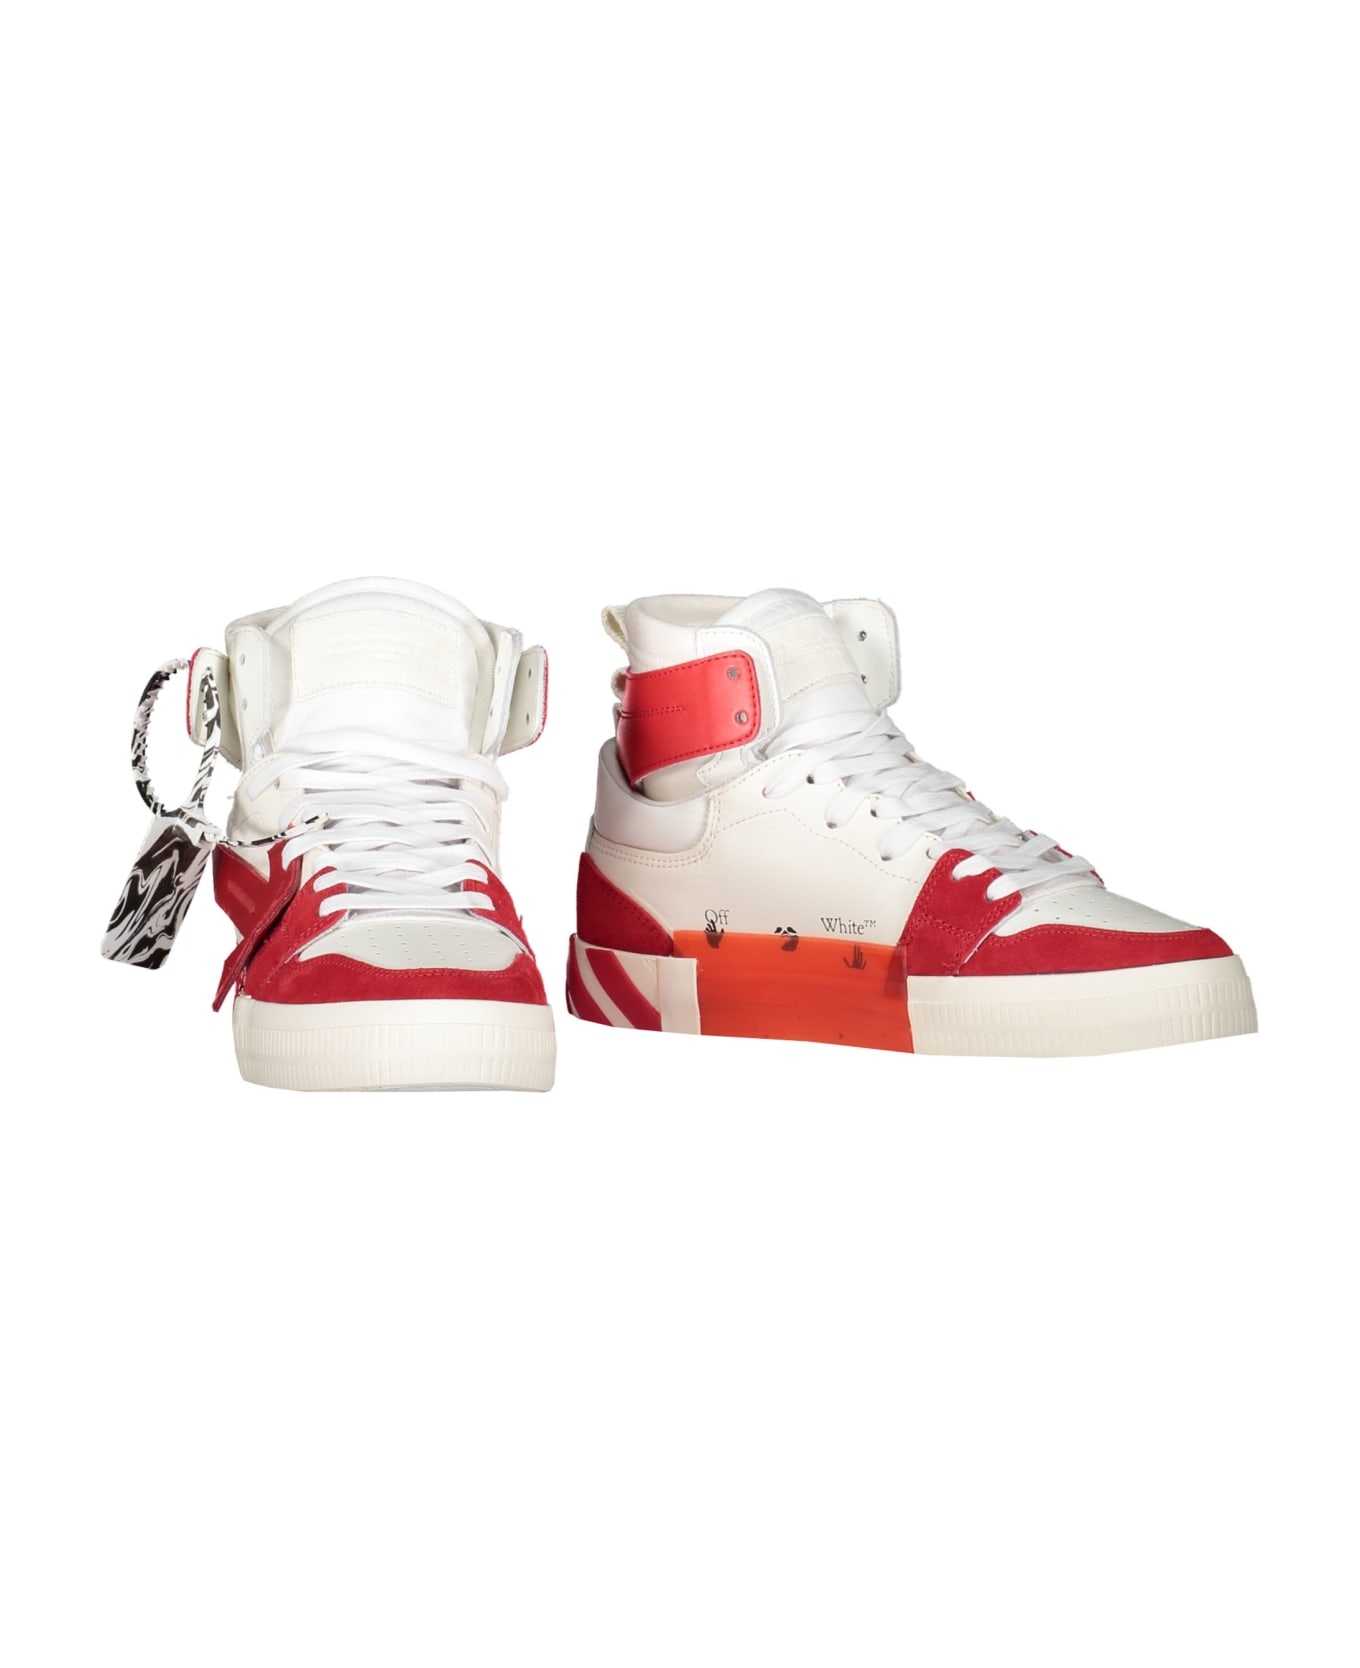 Off-White Vulcanized High-top Sneakers - red スニーカー